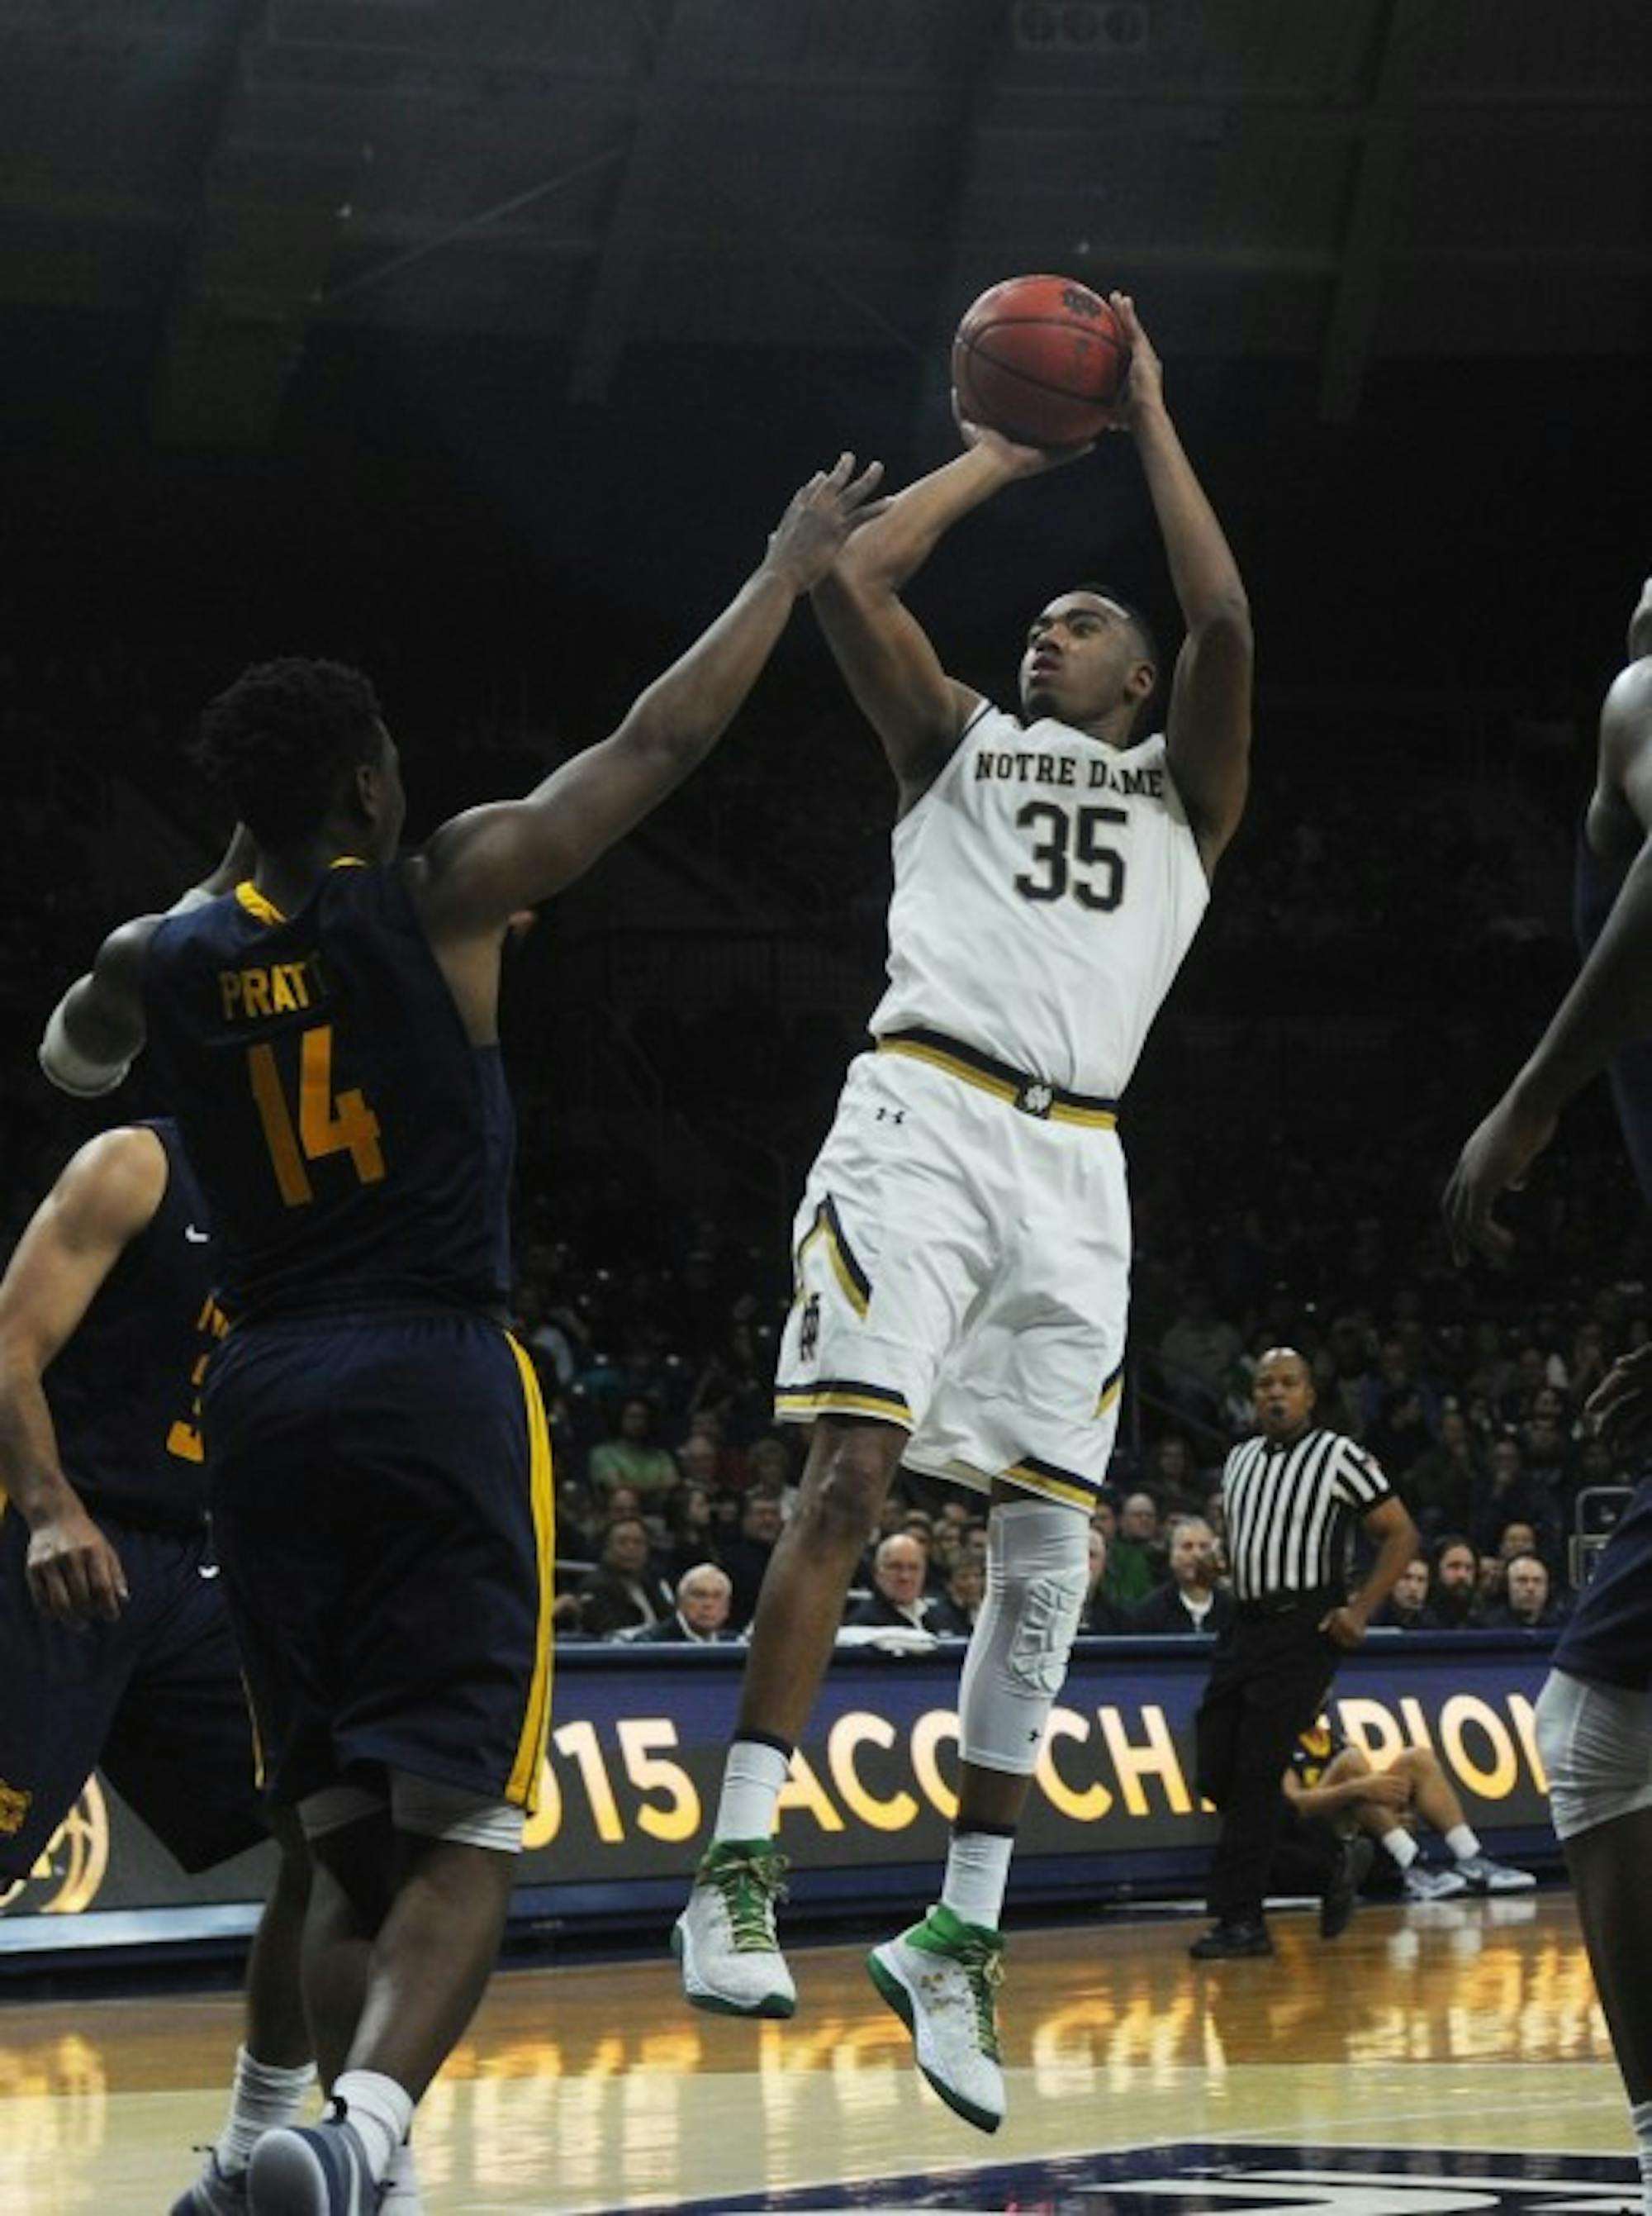 Irish junior forward Bonzie Colson shoots from mid-rage during Notre Dame’s 107-53 over North Carolina AT&T on Sunday.